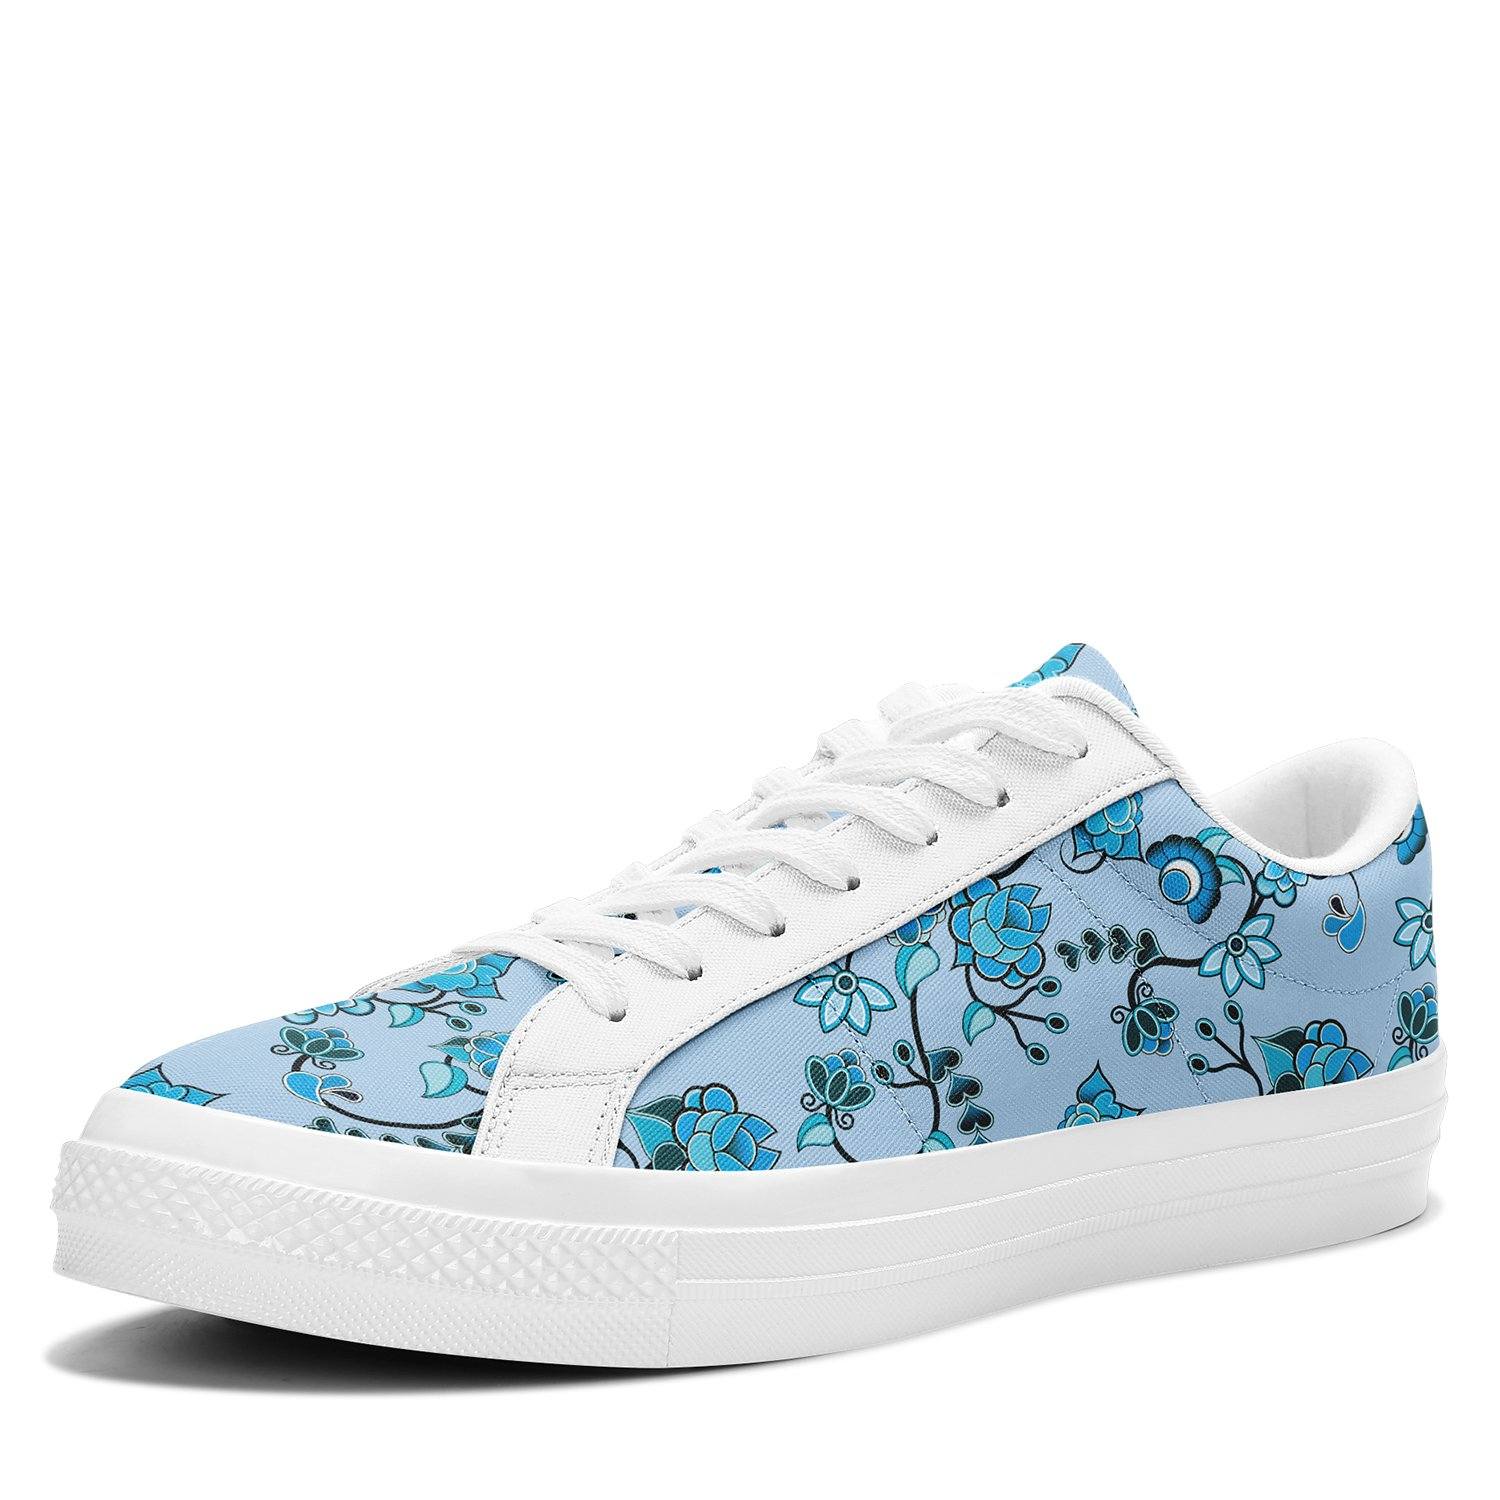 Blue Floral Amour Aapisi Low Top Canvas Shoes White Sole aapisi Herman 